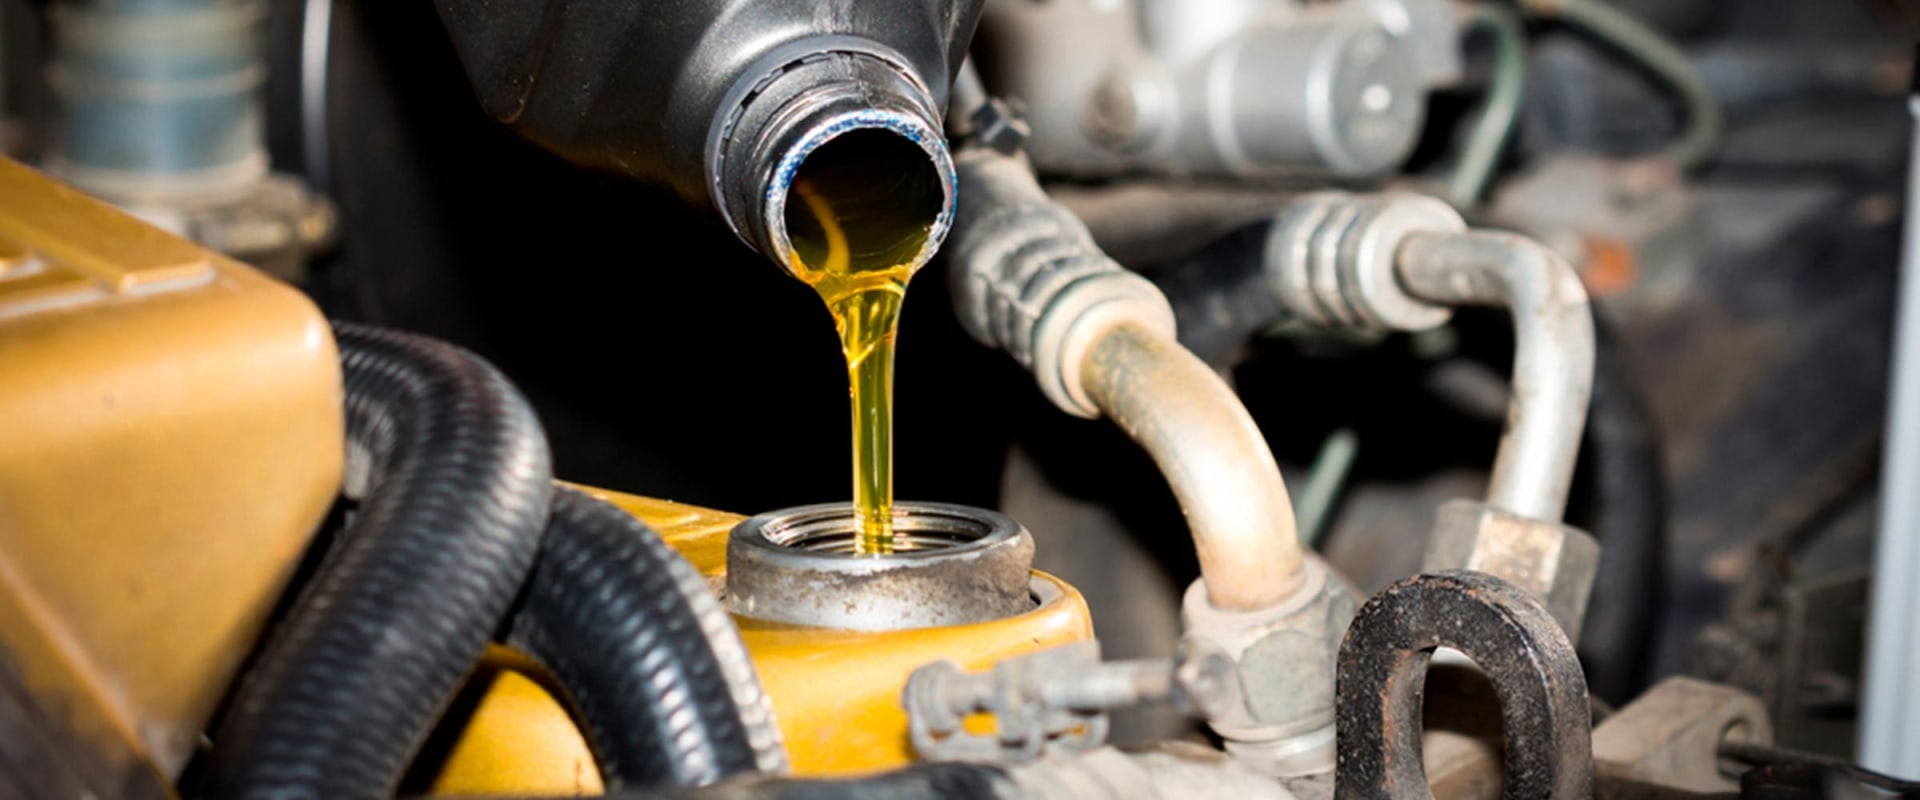 Everything You Need To Know About Oil Changes